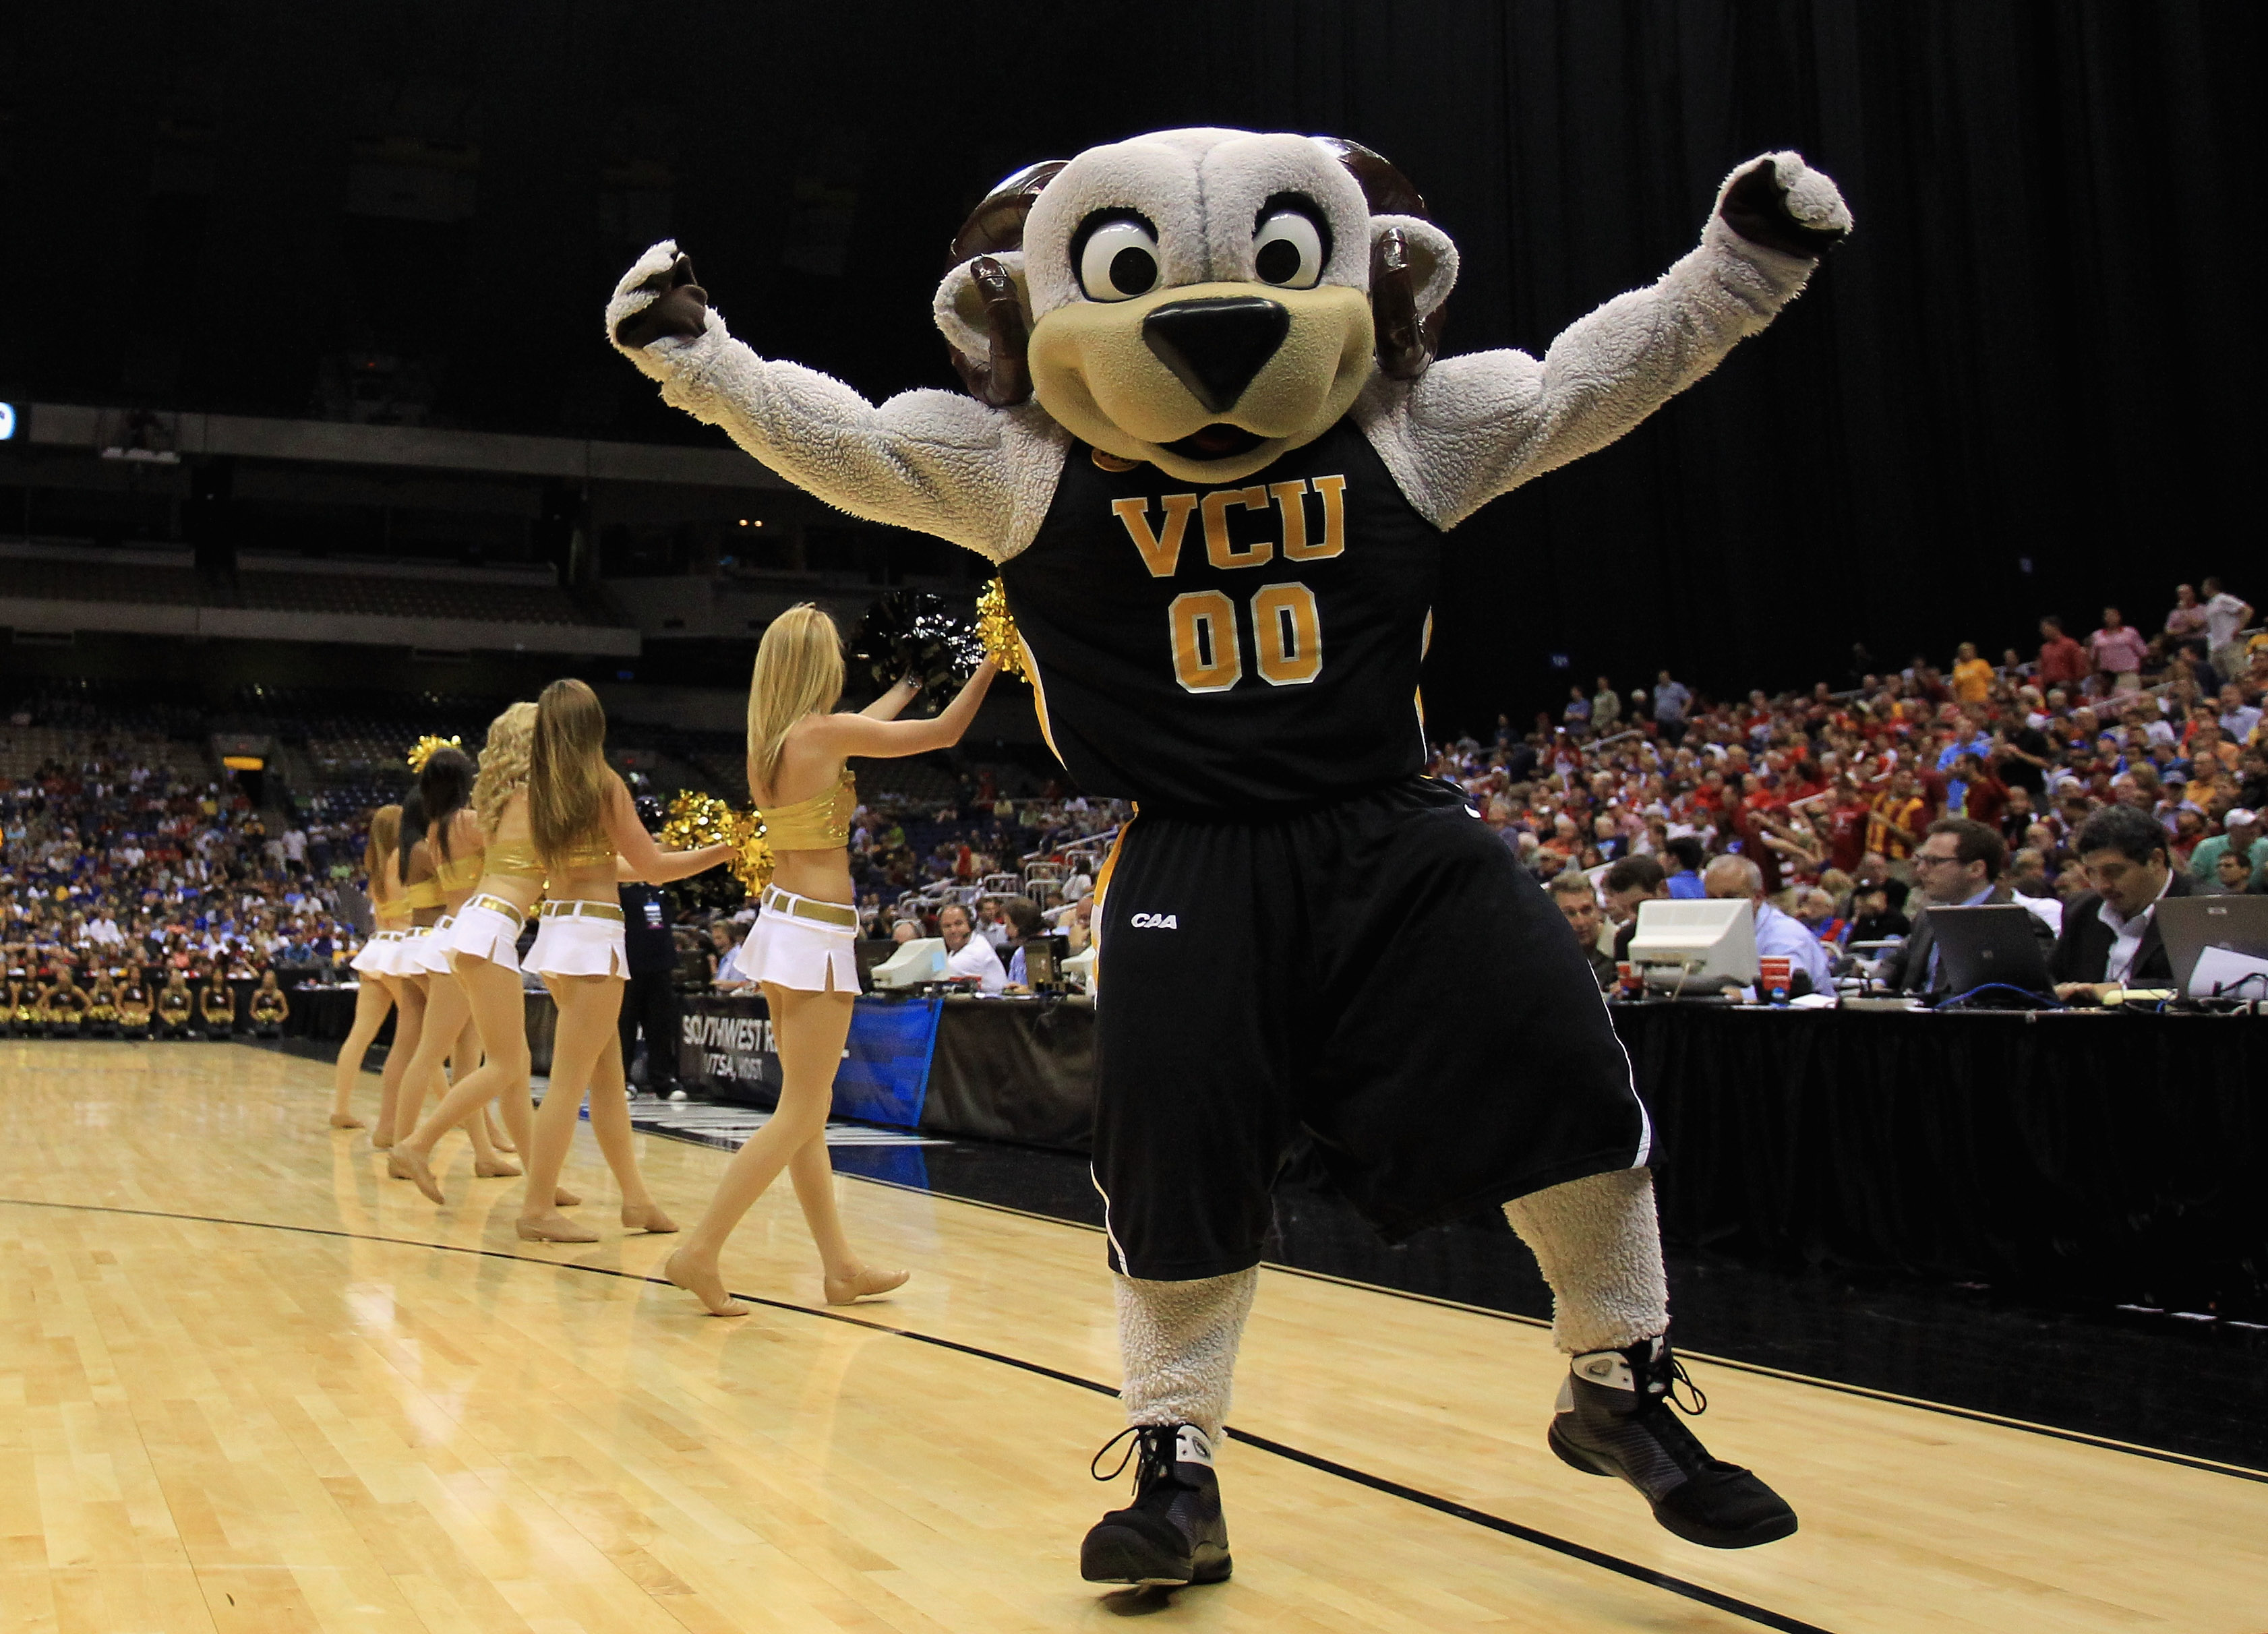 SAN ANTONIO, TX - MARCH 25:  The Virginia Commonwealth Rams mascot and cheerleaders perform during the southwest regional of the 2011 NCAA men's basketball tournament against the Florida State Seminoles at the Alamodome on March 25, 2011 in San Antonio, T